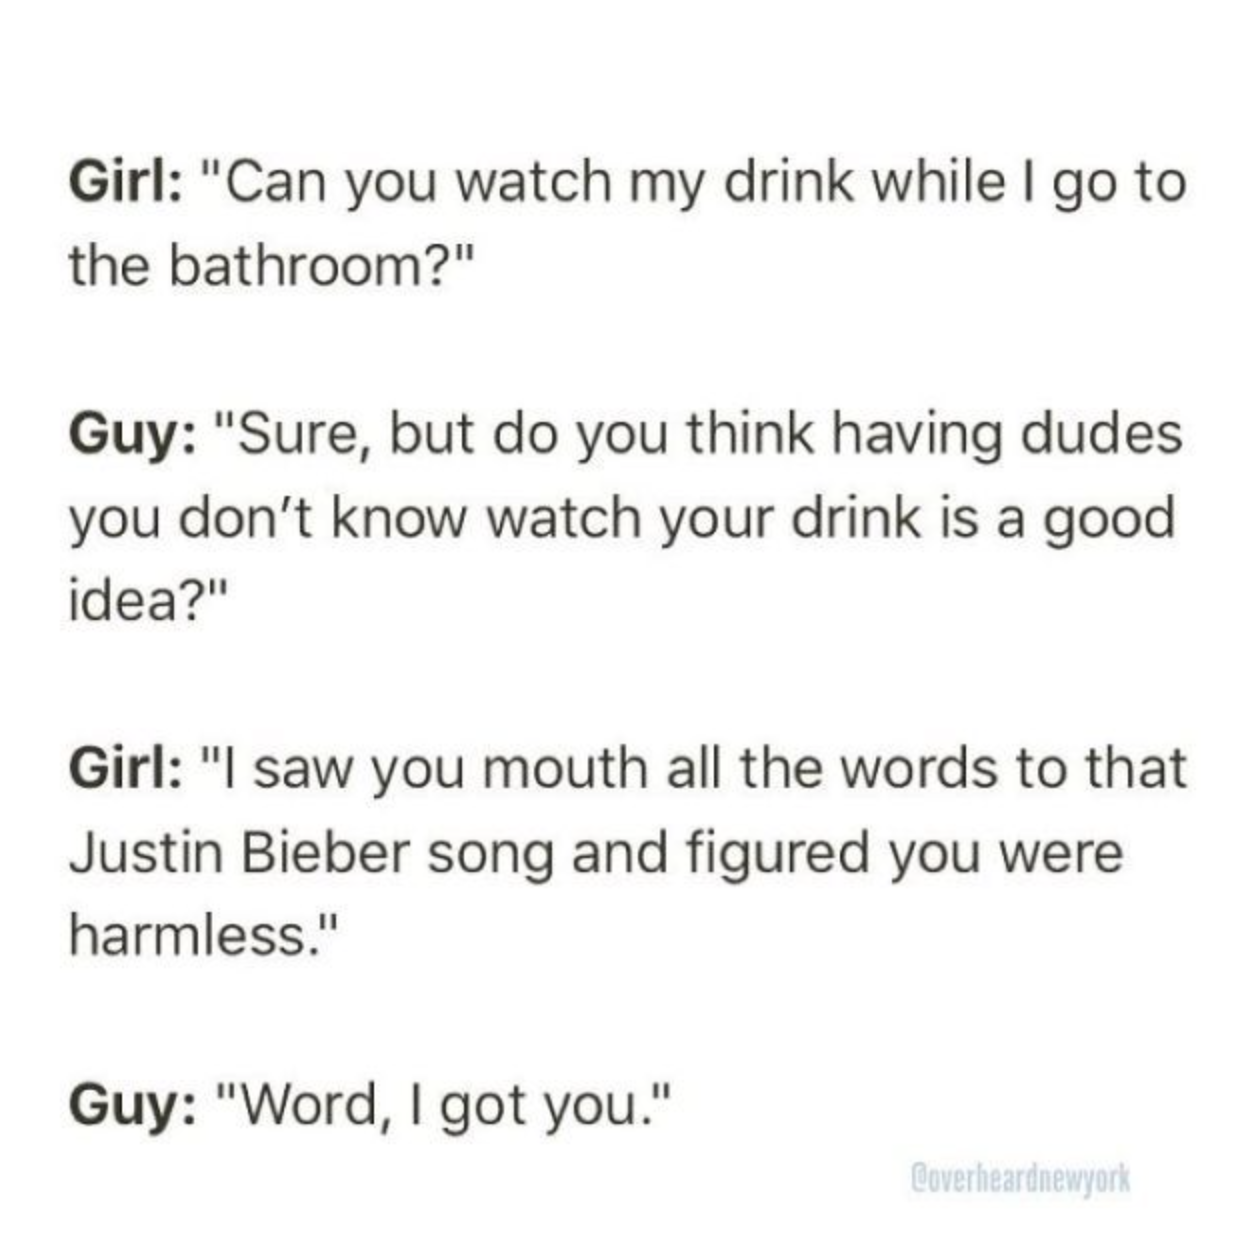 Quasi-polynomial - Girl "Can you watch my drink while I go to the bathroom?" Guy "Sure, but do you think having dudes you don't know watch your drink is a good idea?" Girl "I saw you mouth all the words to that Justin Bieber song and figured you were harm